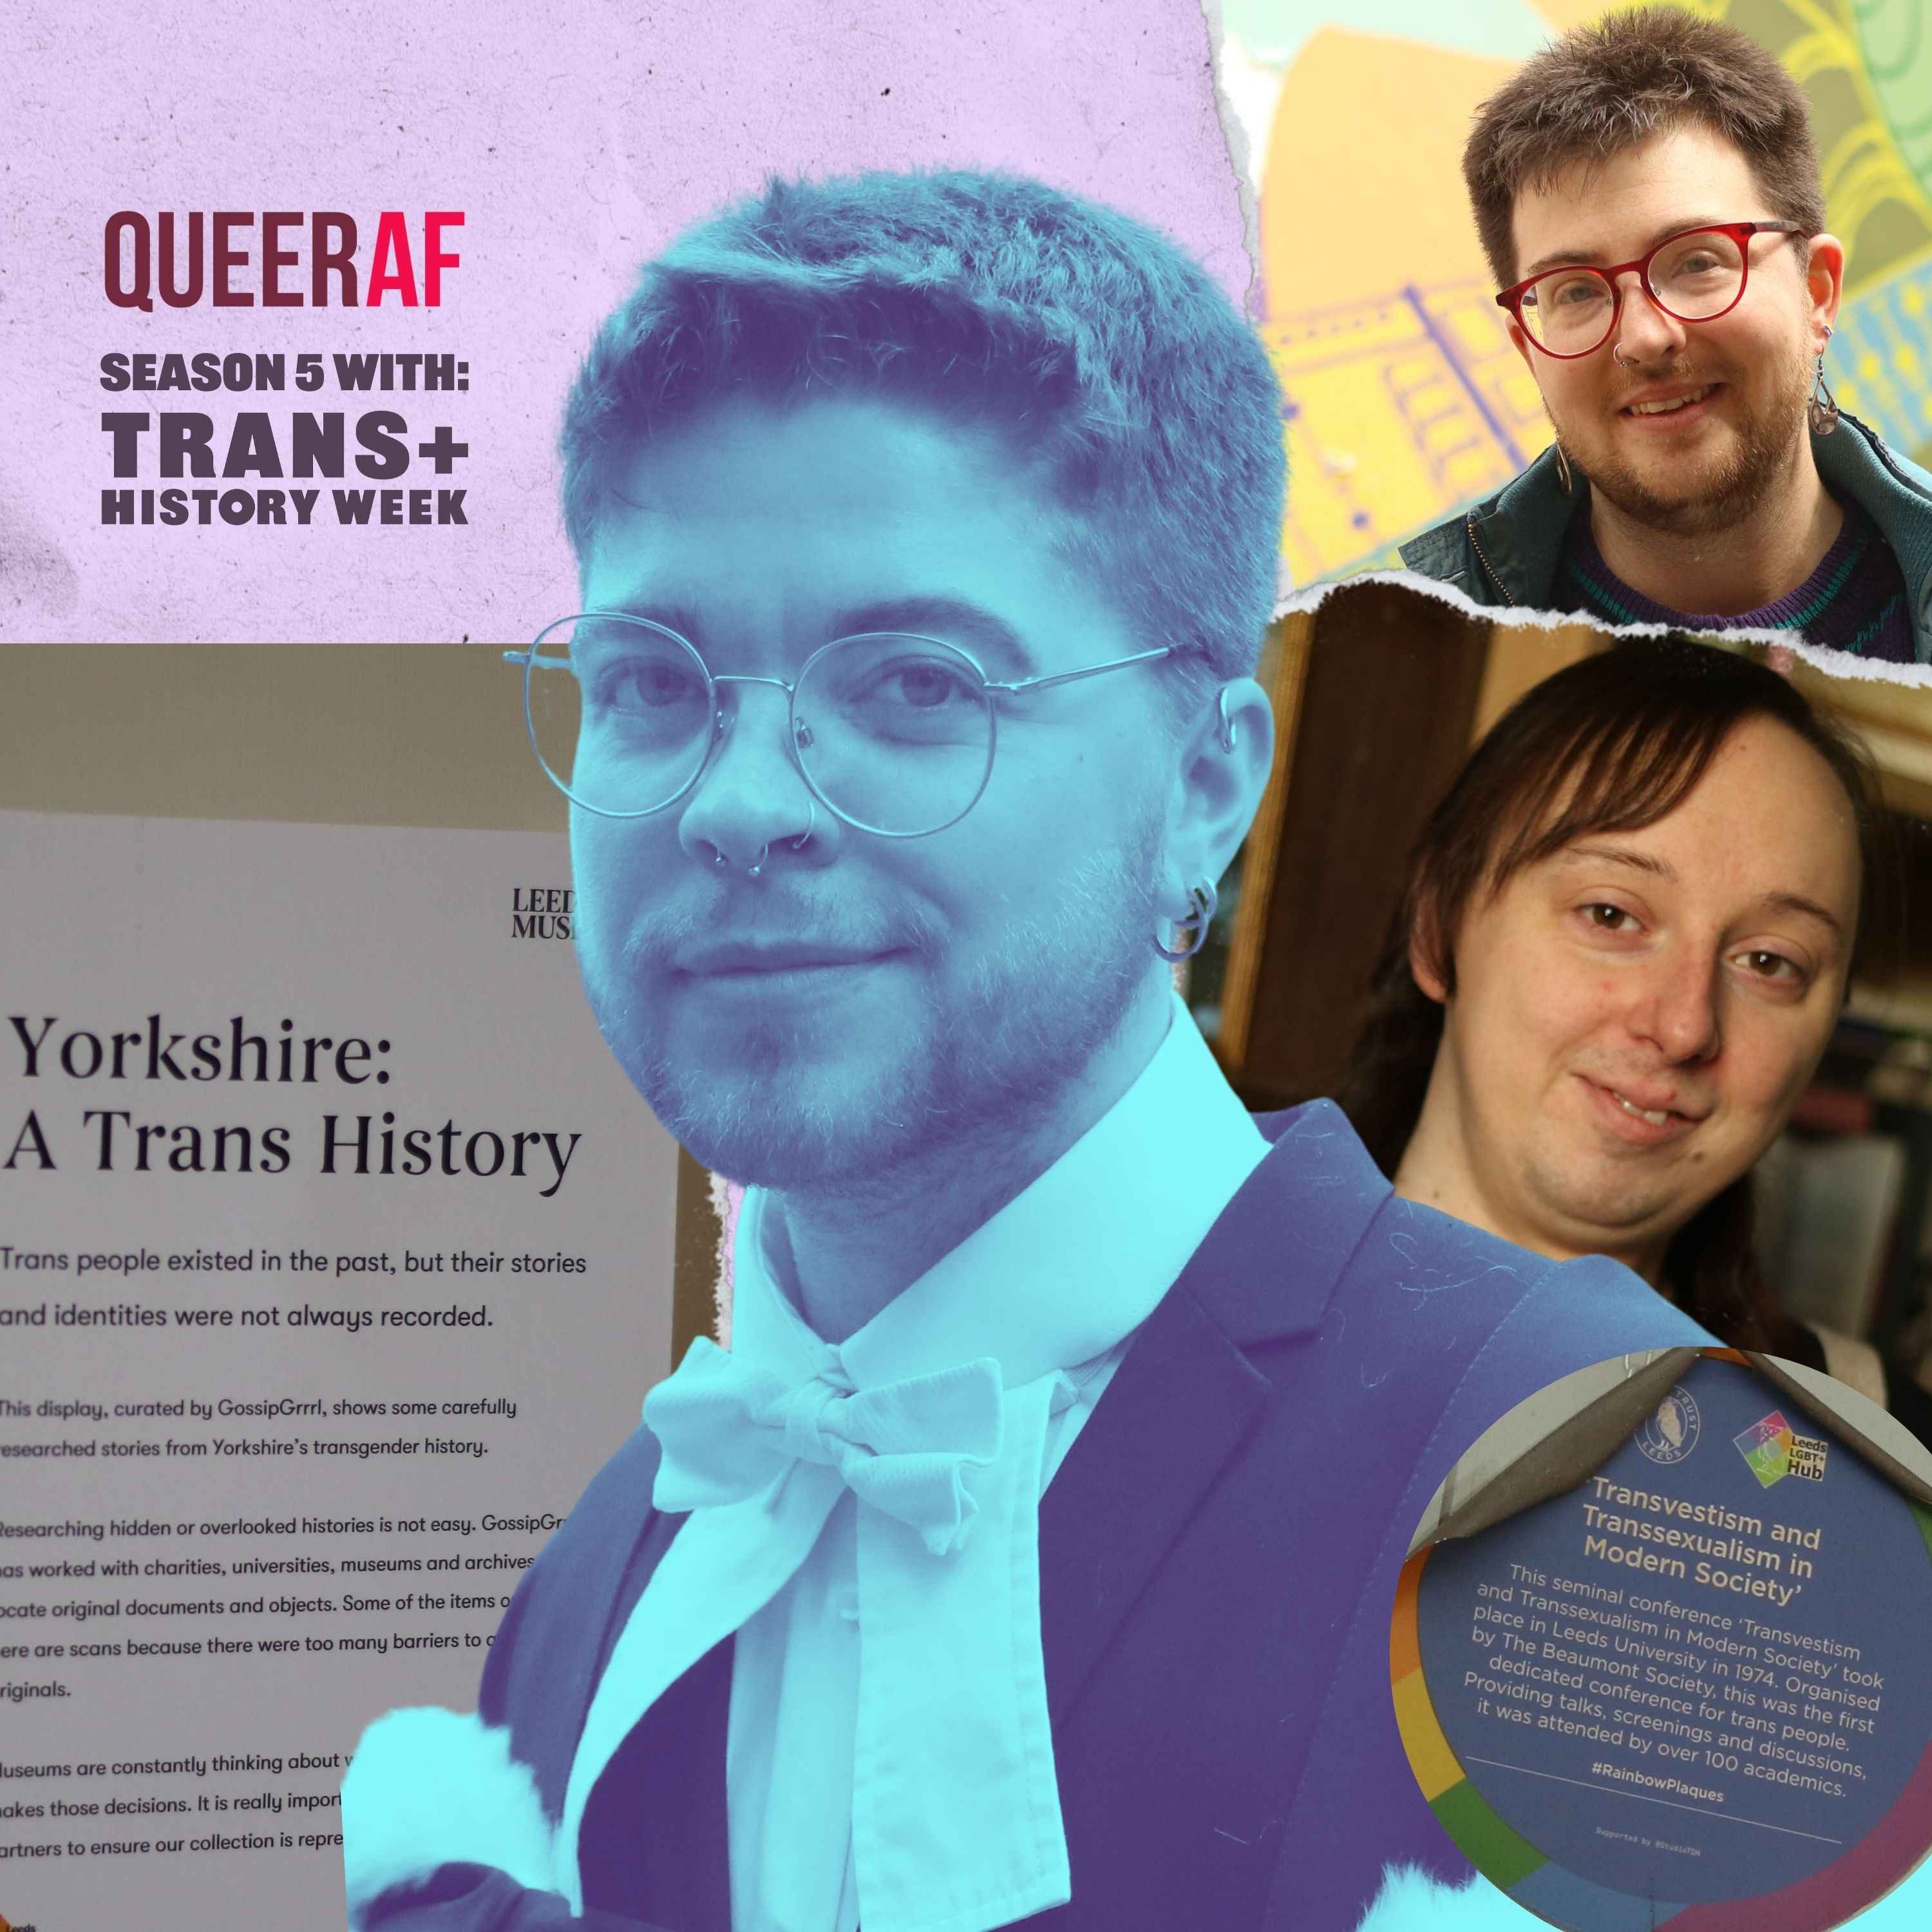 Going back to my old home, to uncover the UK's first ever Trans+ conference